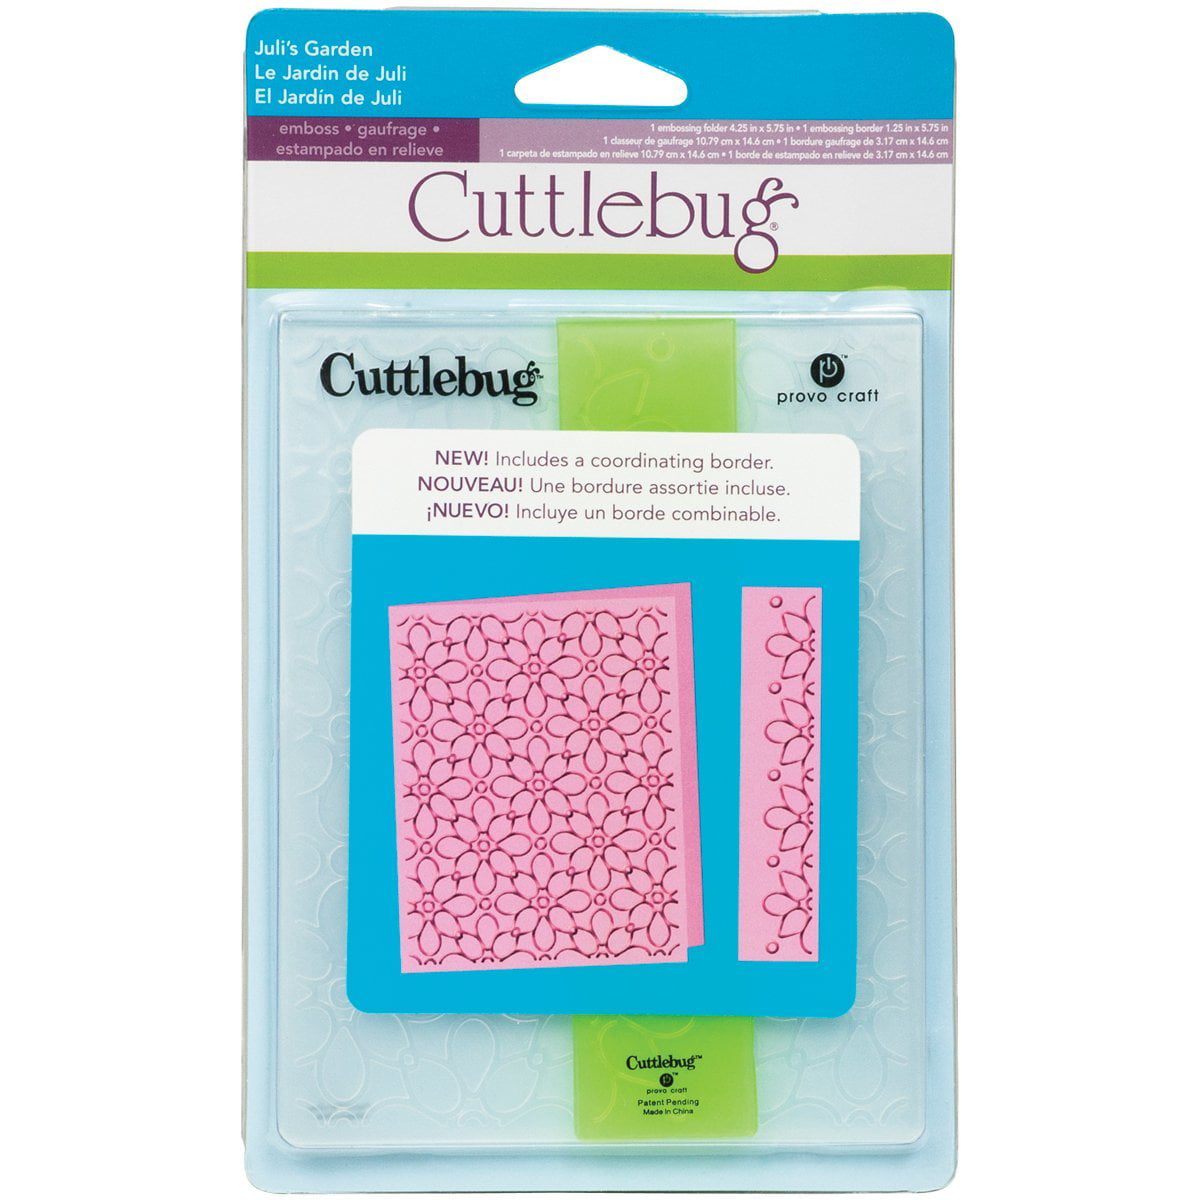 Cuttlebug Cricut A2 Embossing Folder and Border Paper Crafts Love Triangle 